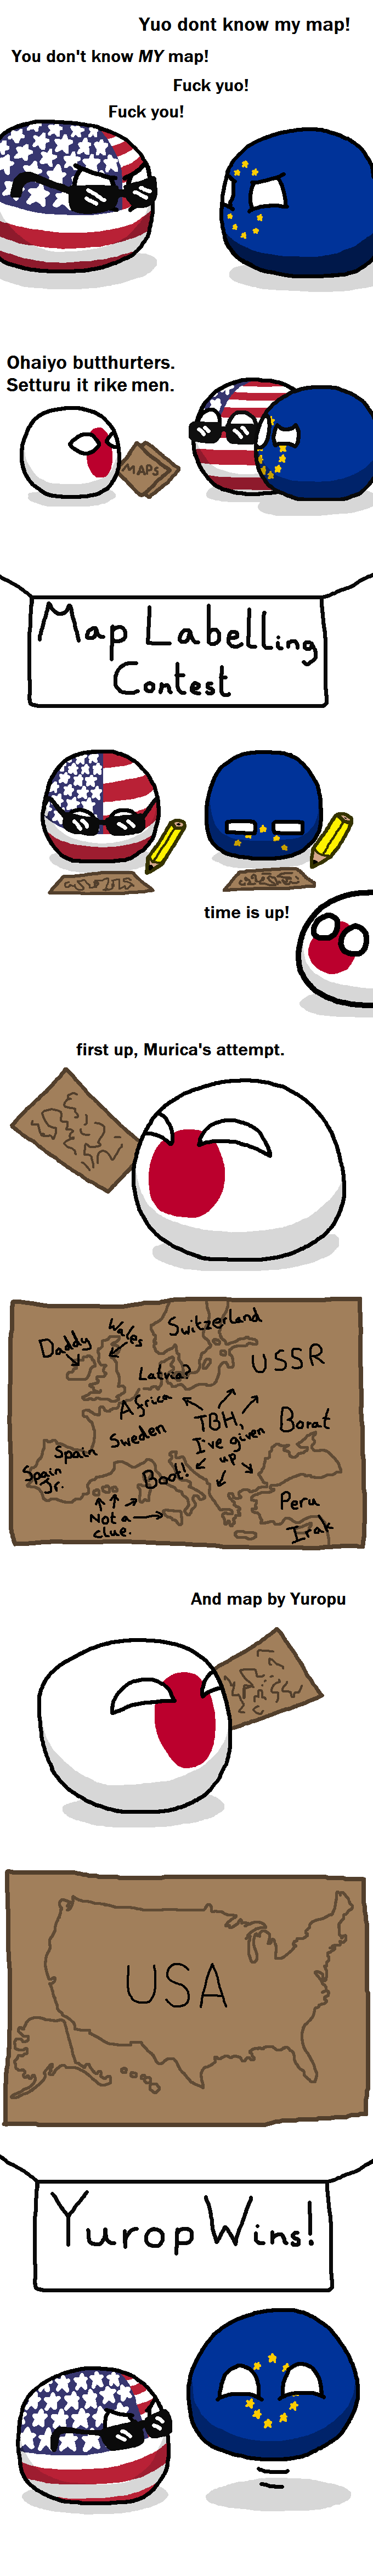 country-balls-geography